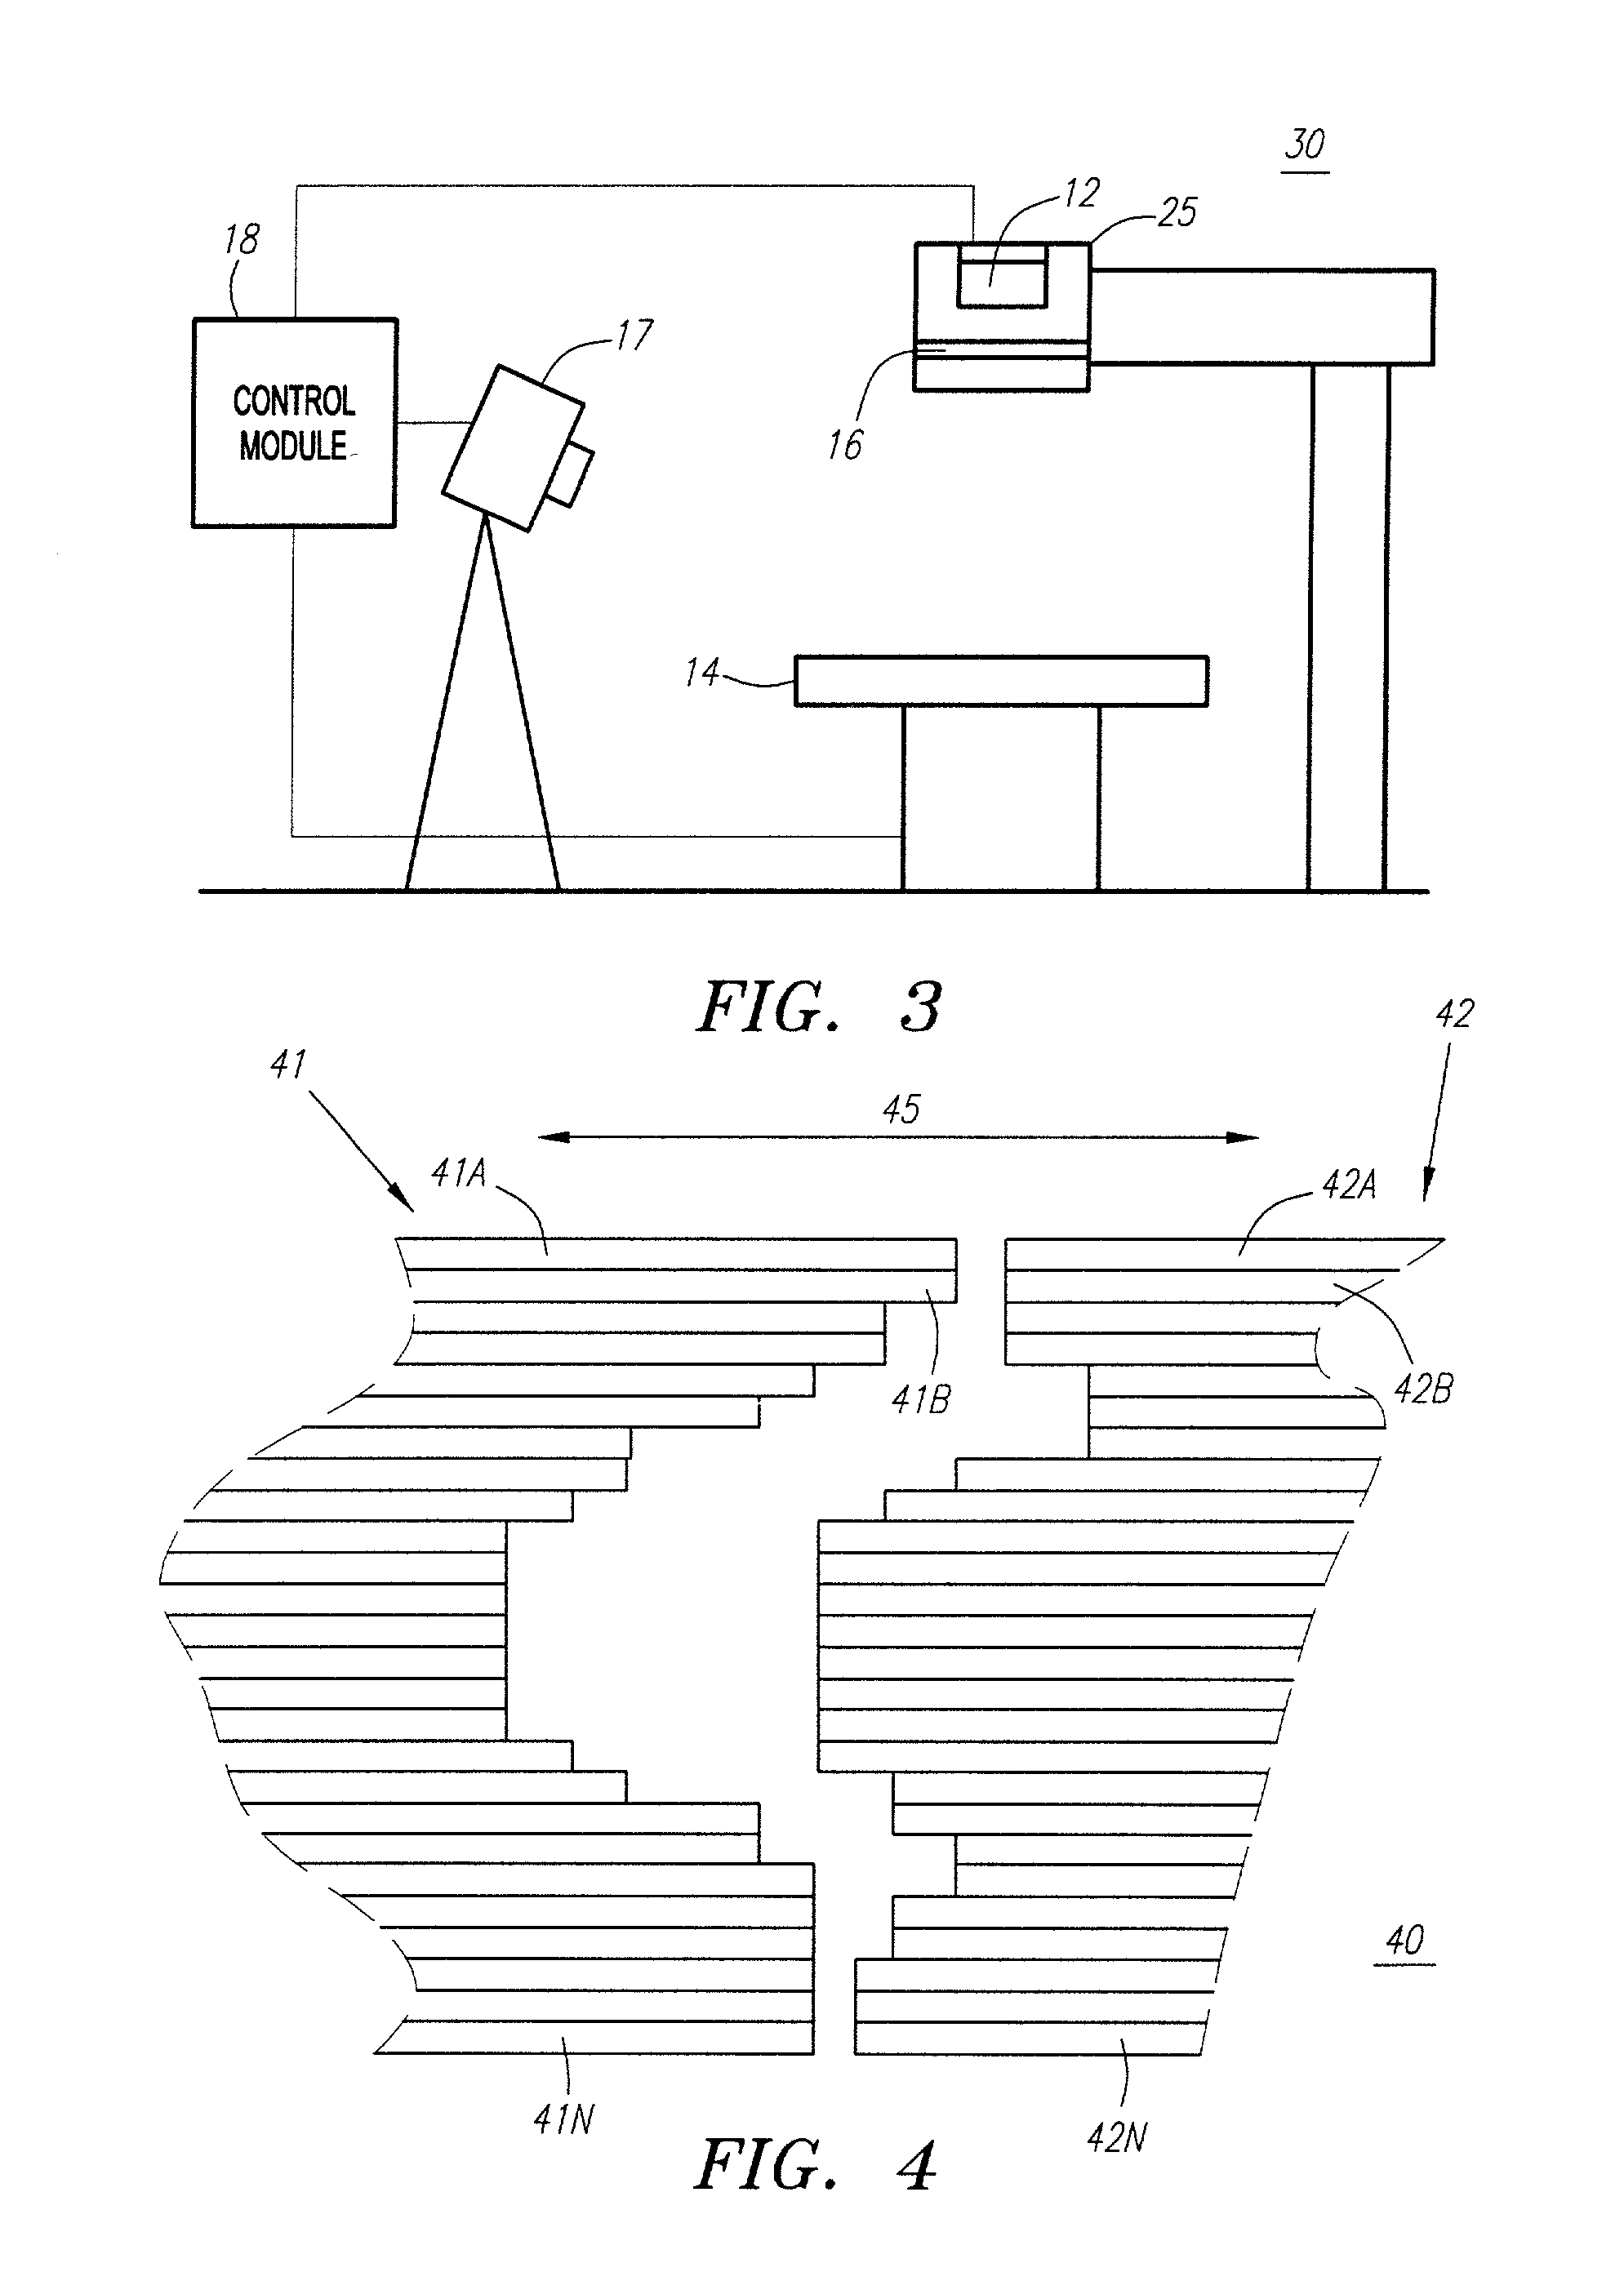 Method and apparatus for irradiating a target